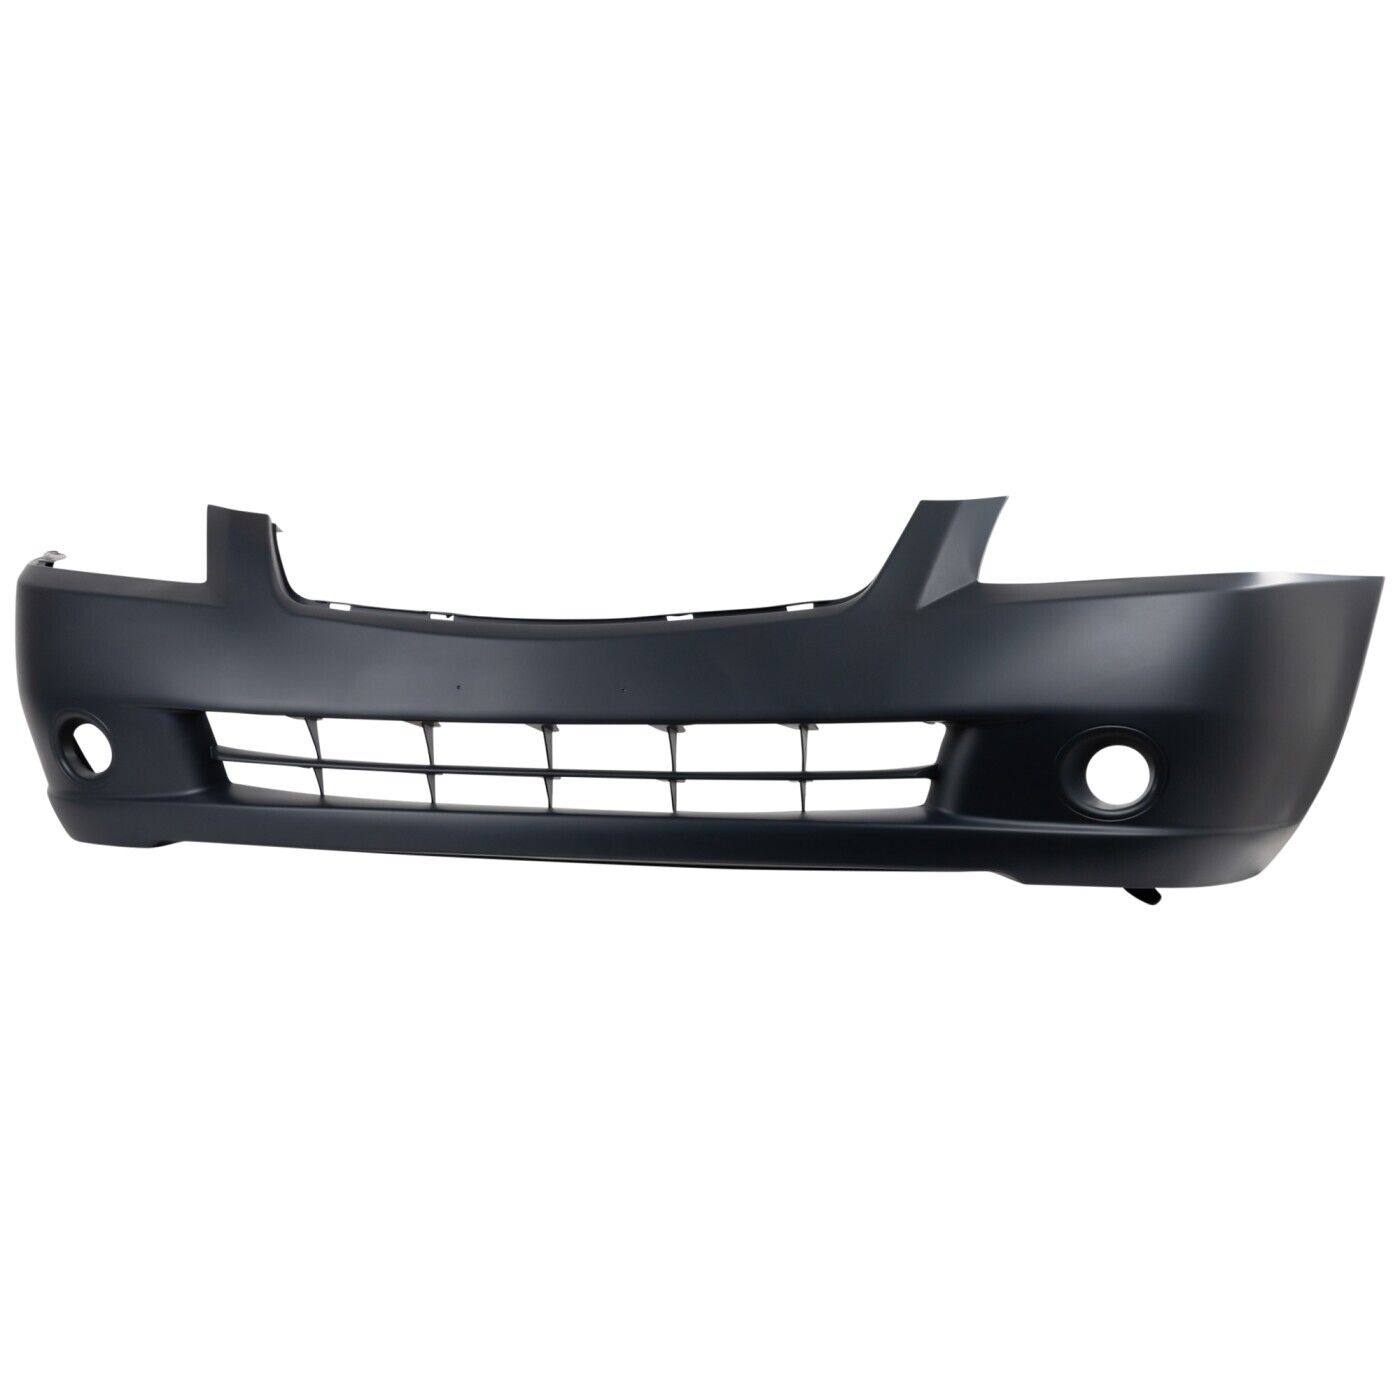 Front Bumper Cover For 05-06 Nissan Altima Sedan with Fog Light Holes 62022ZB000